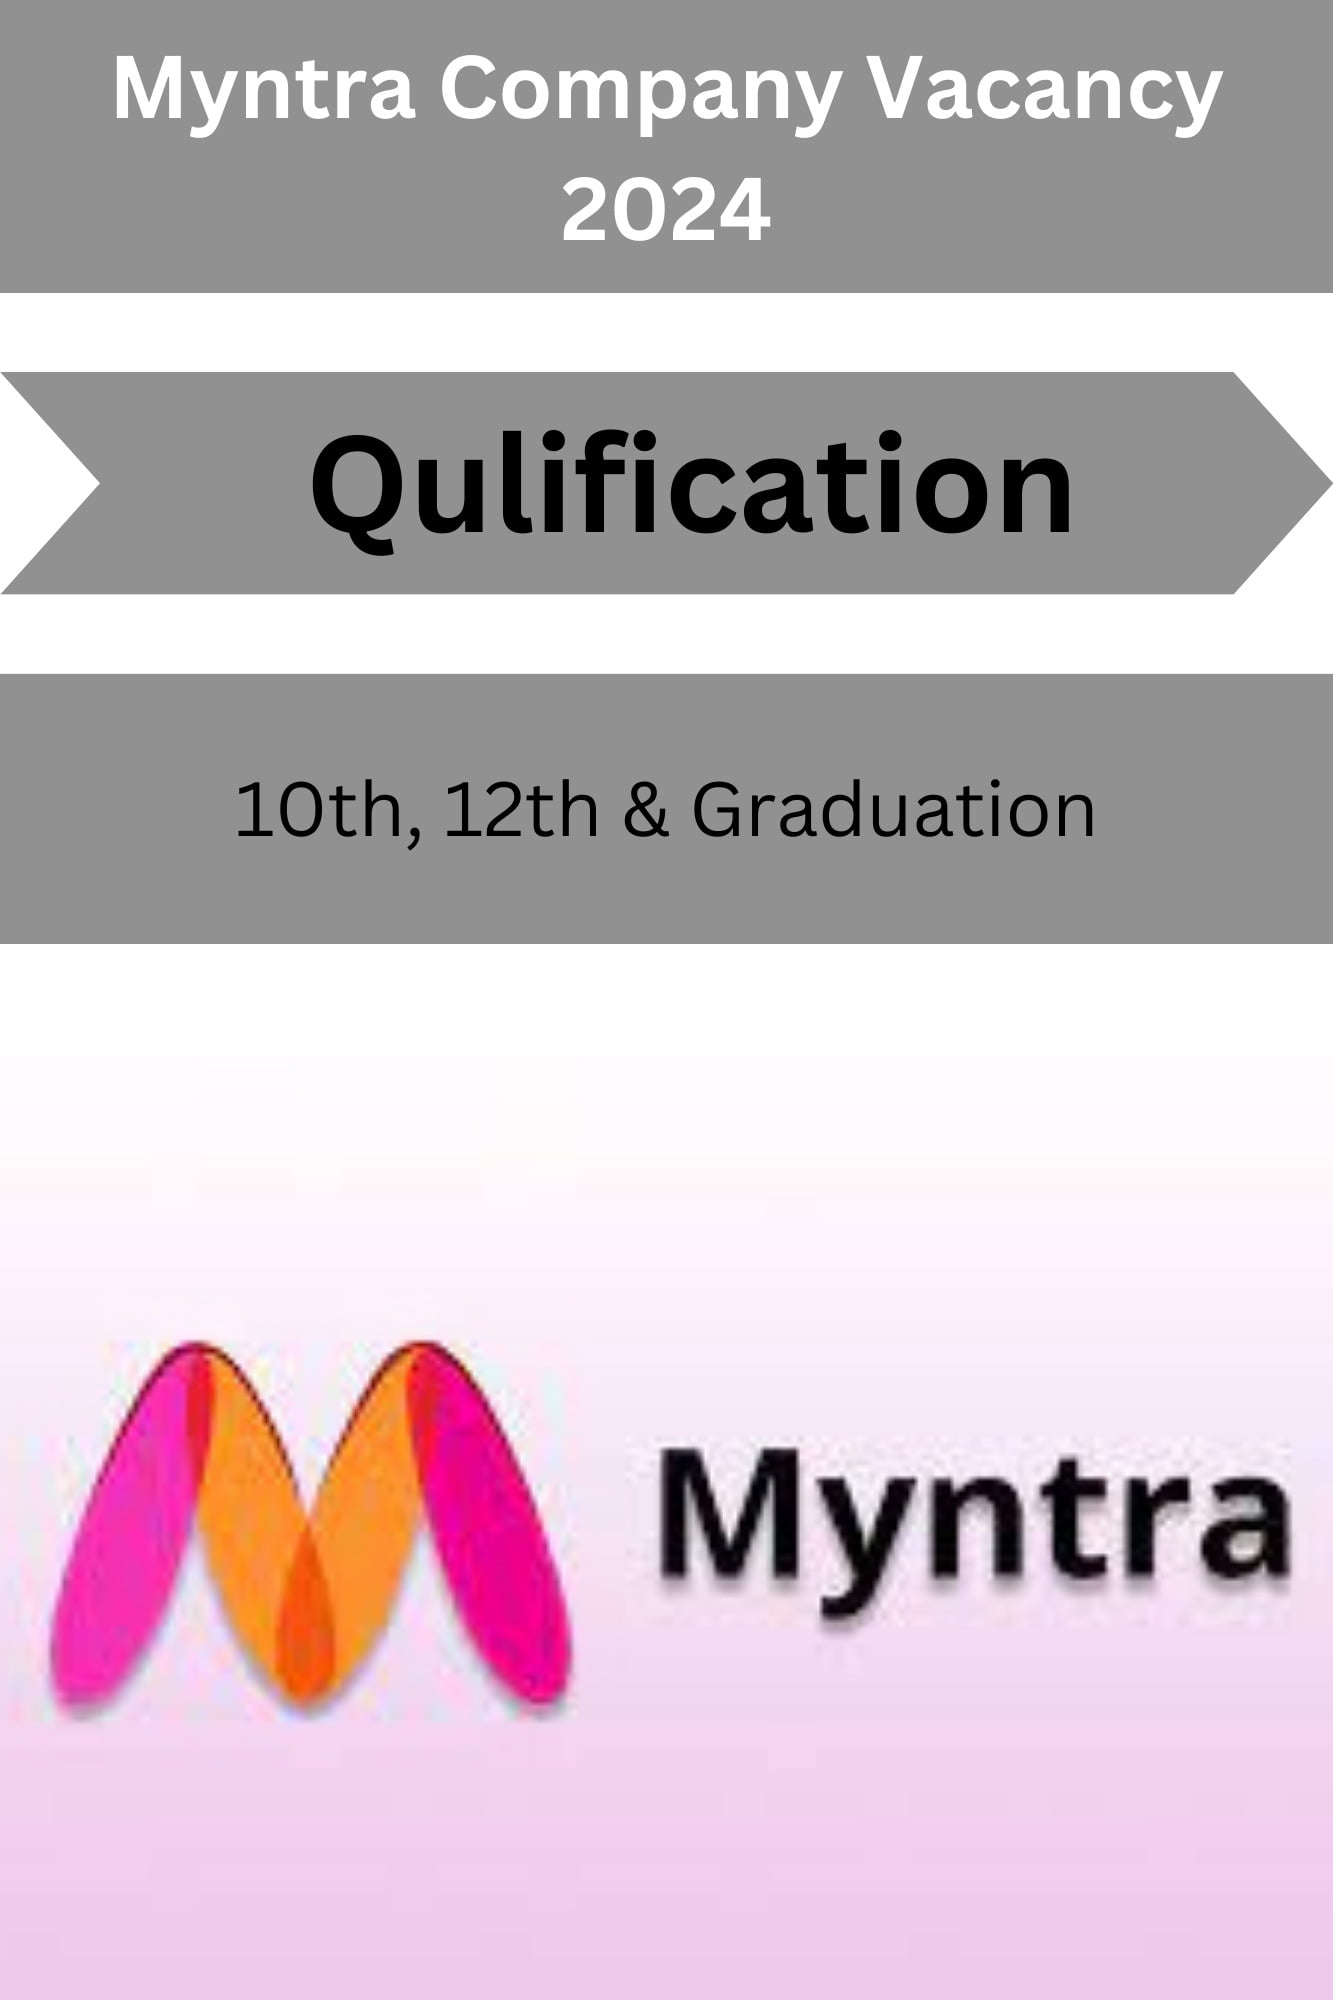 Myntra Company Vacancy 2024 : Urgent job requirment in mytra